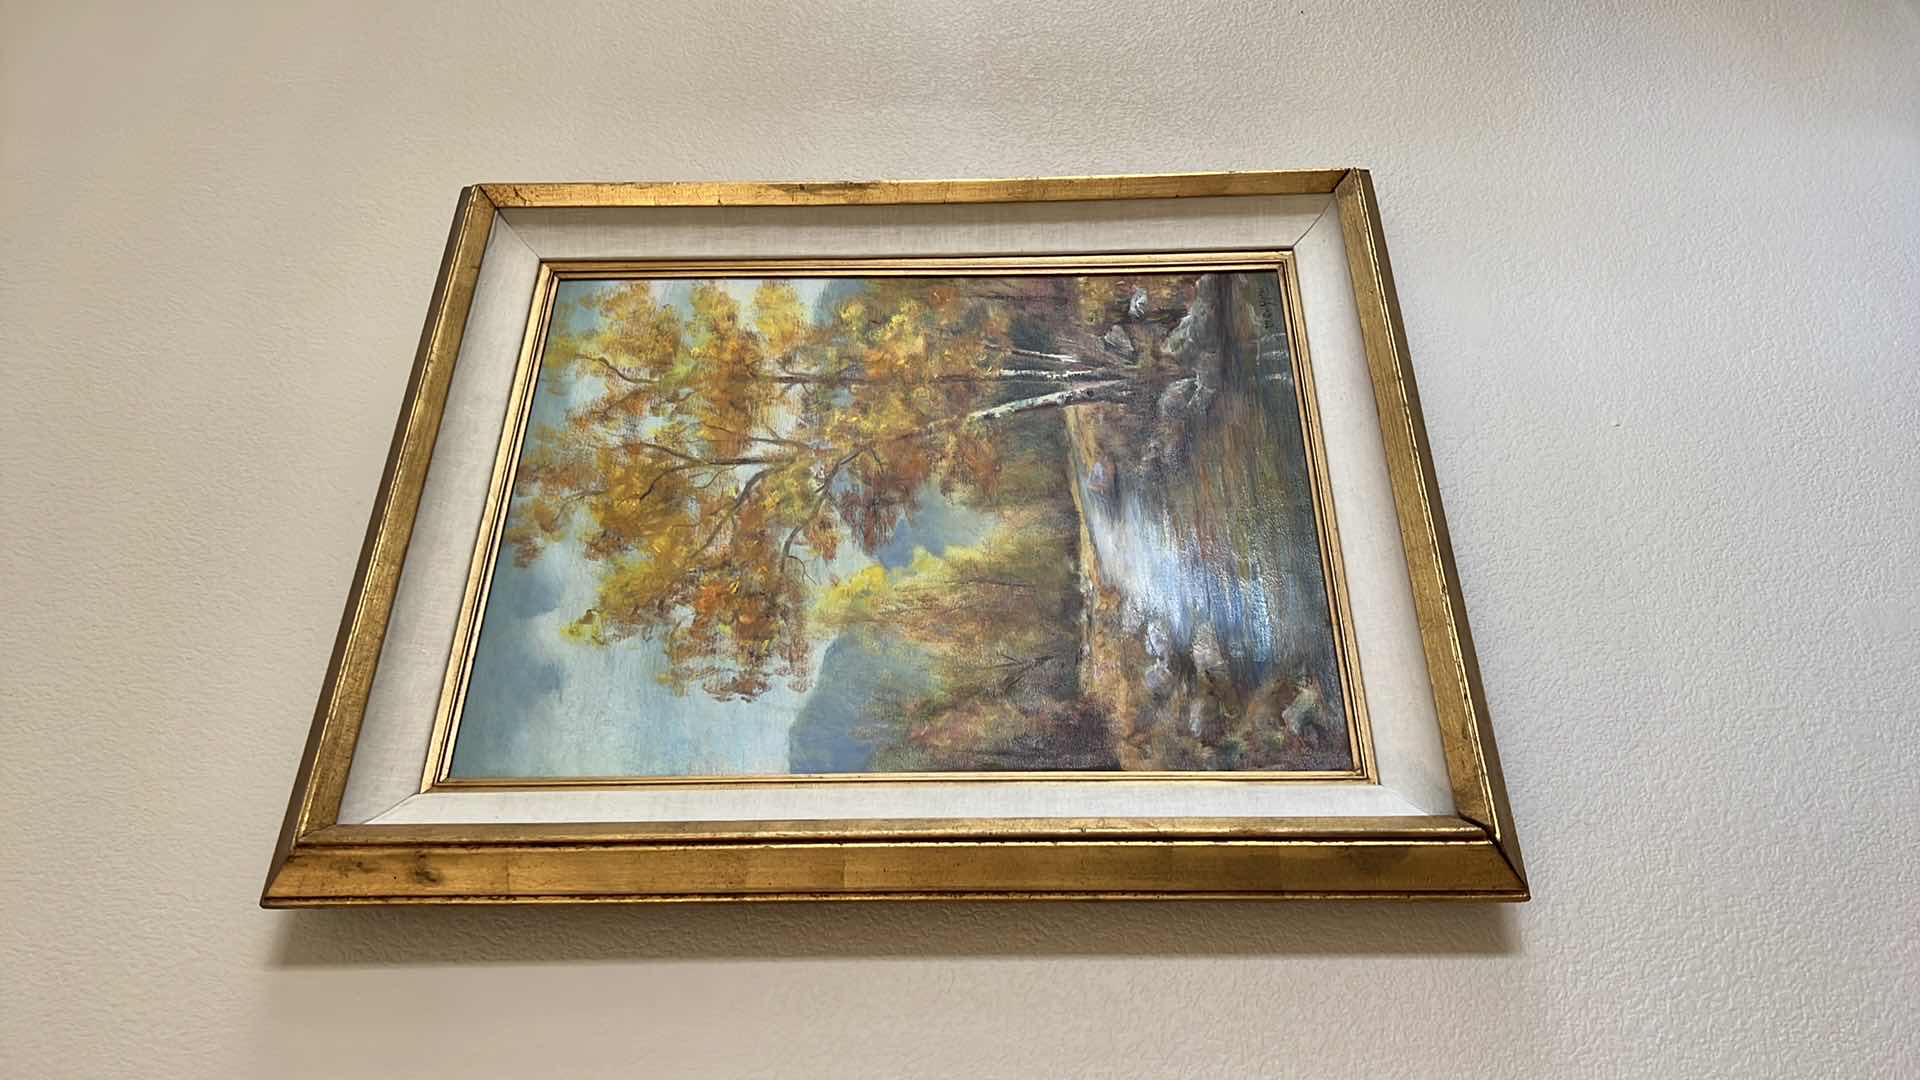 Photo 2 of VINTAGE GOLD FRAMED SCENERY OIL PAINTING SIGNED BY M GRIFFIT ARTIST 25”x30”